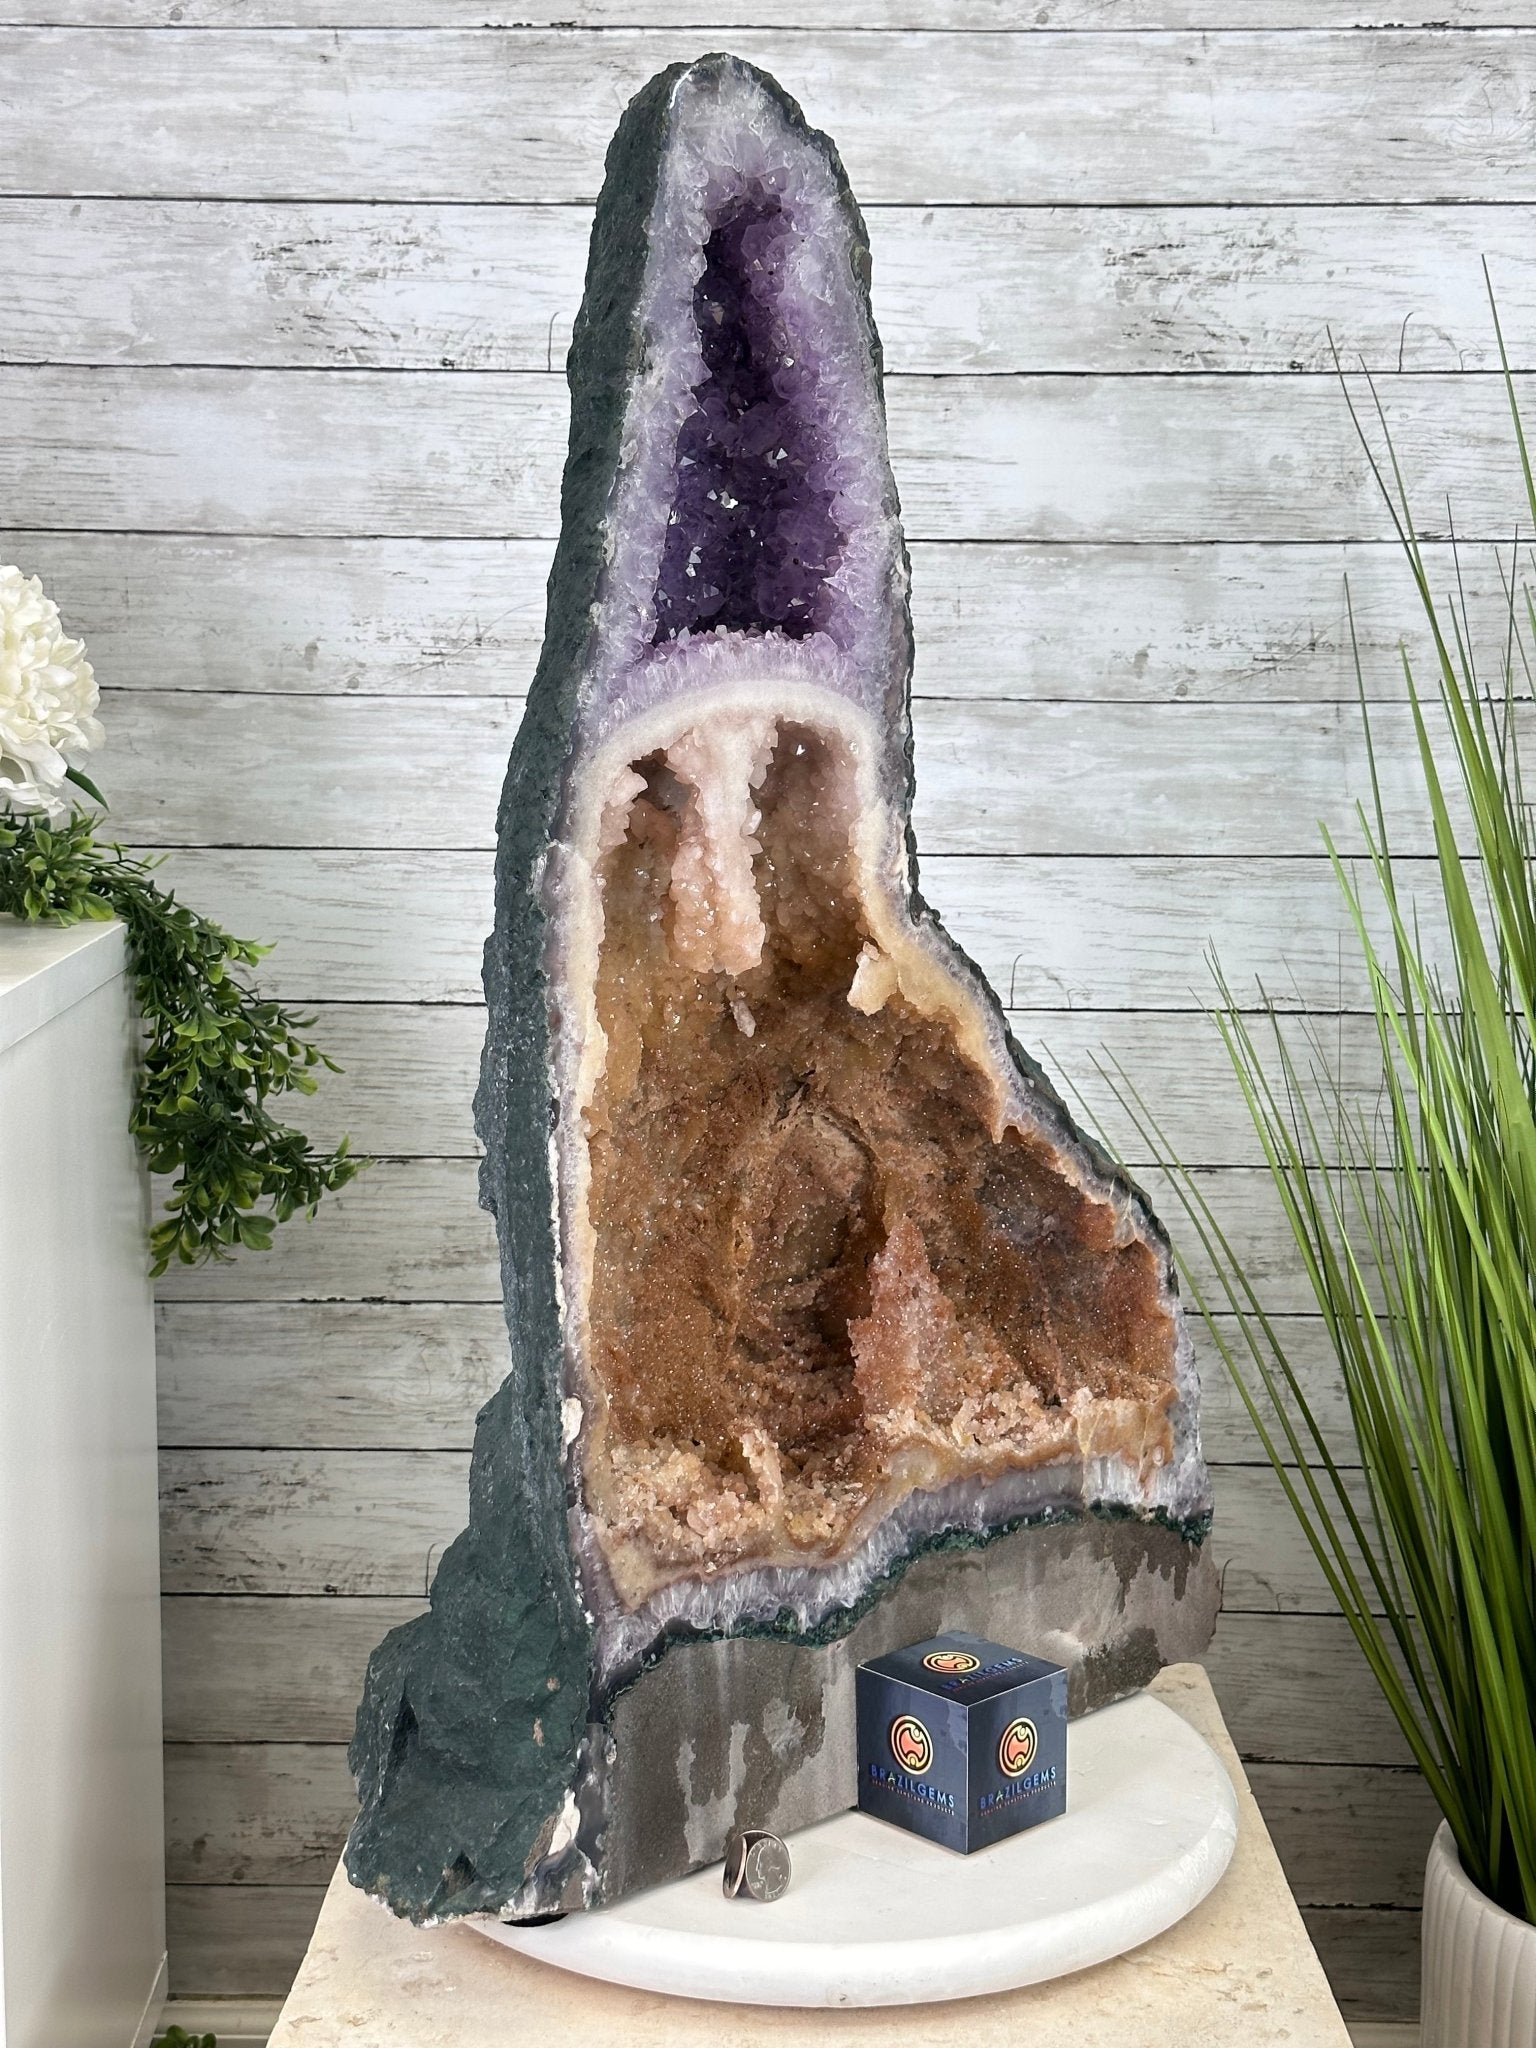 Super Quality Brazilian Amethyst Cathedral, 81.8 lbs & 28.5" Tall, Model #5601-1265 by Brazil Gems - Brazil GemsBrazil GemsSuper Quality Brazilian Amethyst Cathedral, 81.8 lbs & 28.5" Tall, Model #5601-1265 by Brazil GemsCathedrals5601-1265